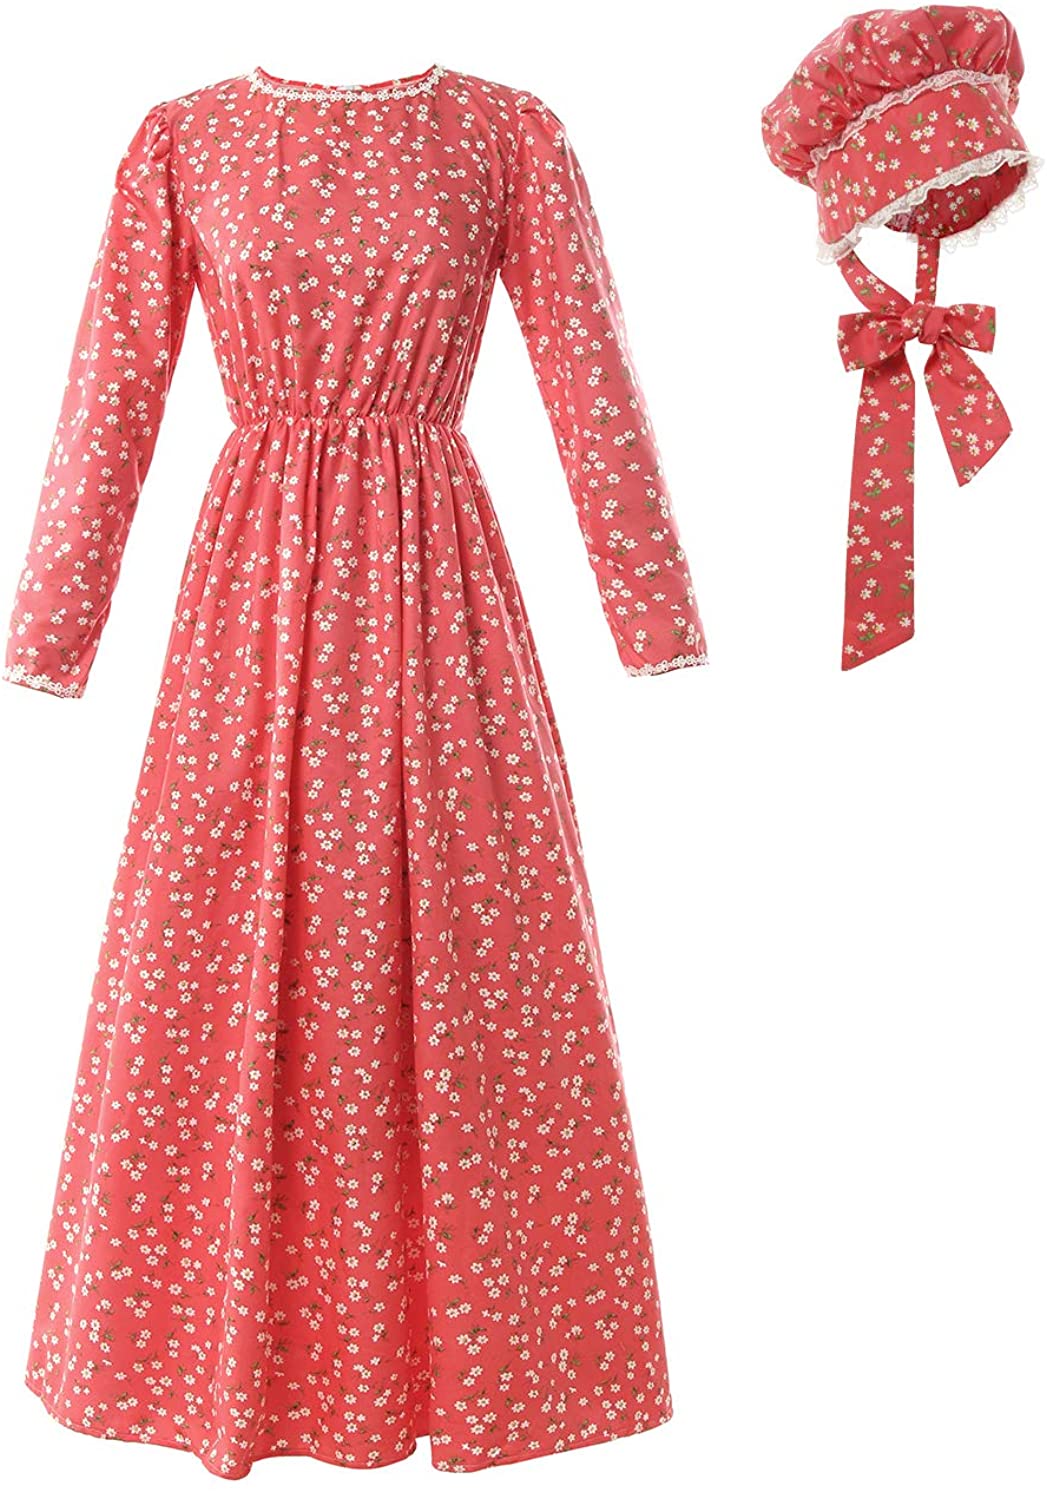 Women Pioneer Costume Floral Prairie Dress Cotton Deluxe Colonial  Maid Dress 